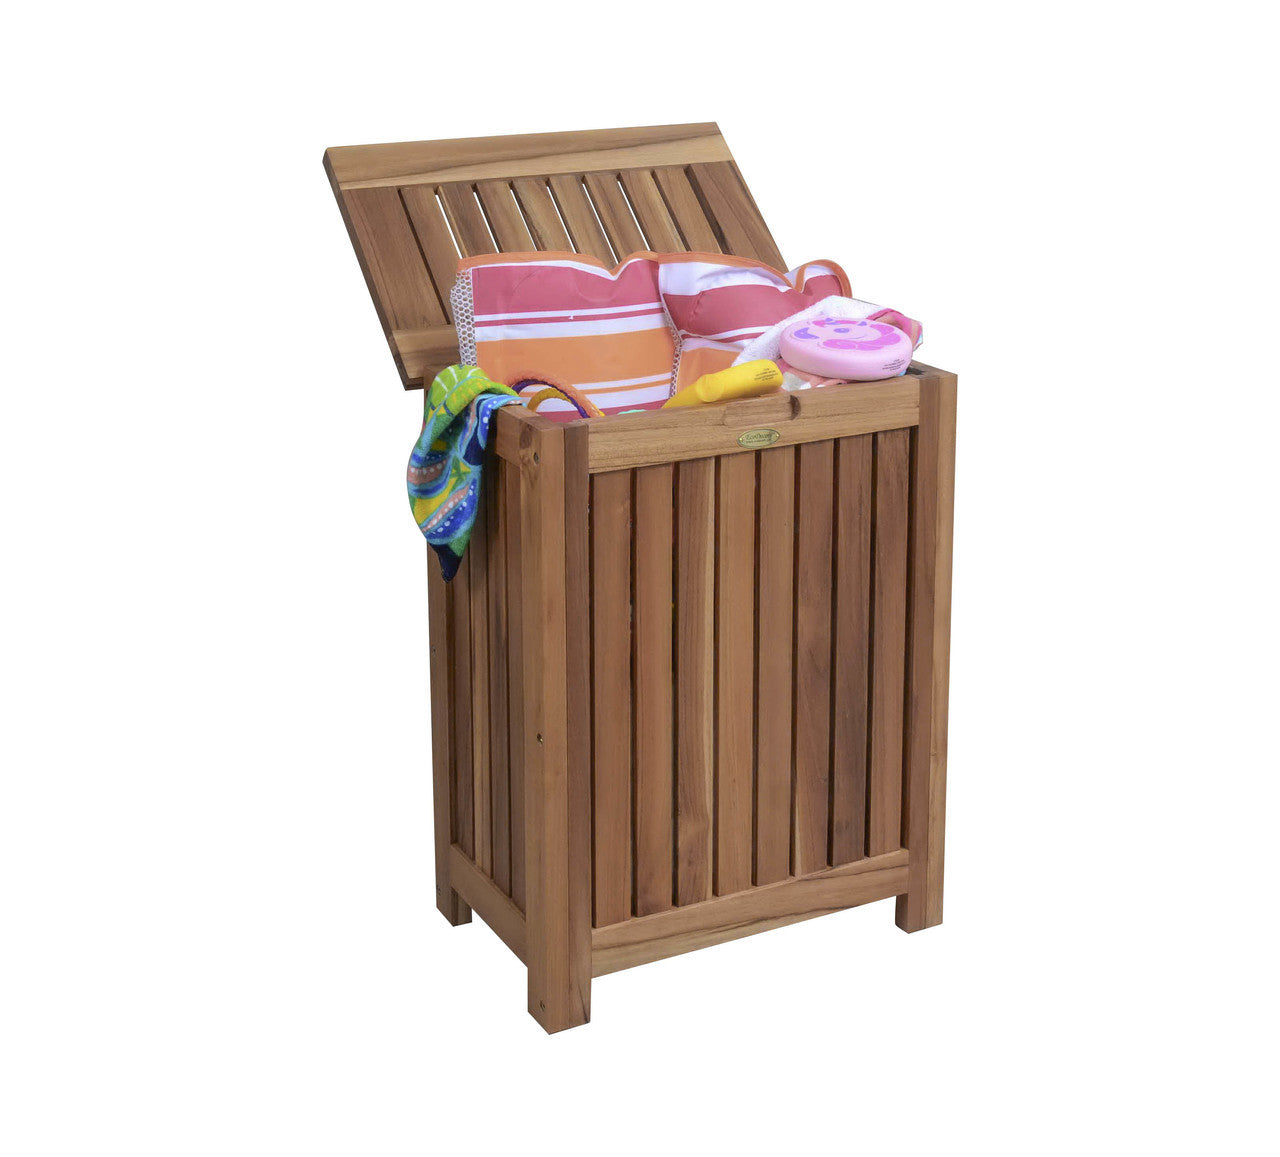 EcoDecors® Eleganto® 18" Teak Wood Double Laundry Storage Hamper with Removable Bags in EarthyTeak Finish